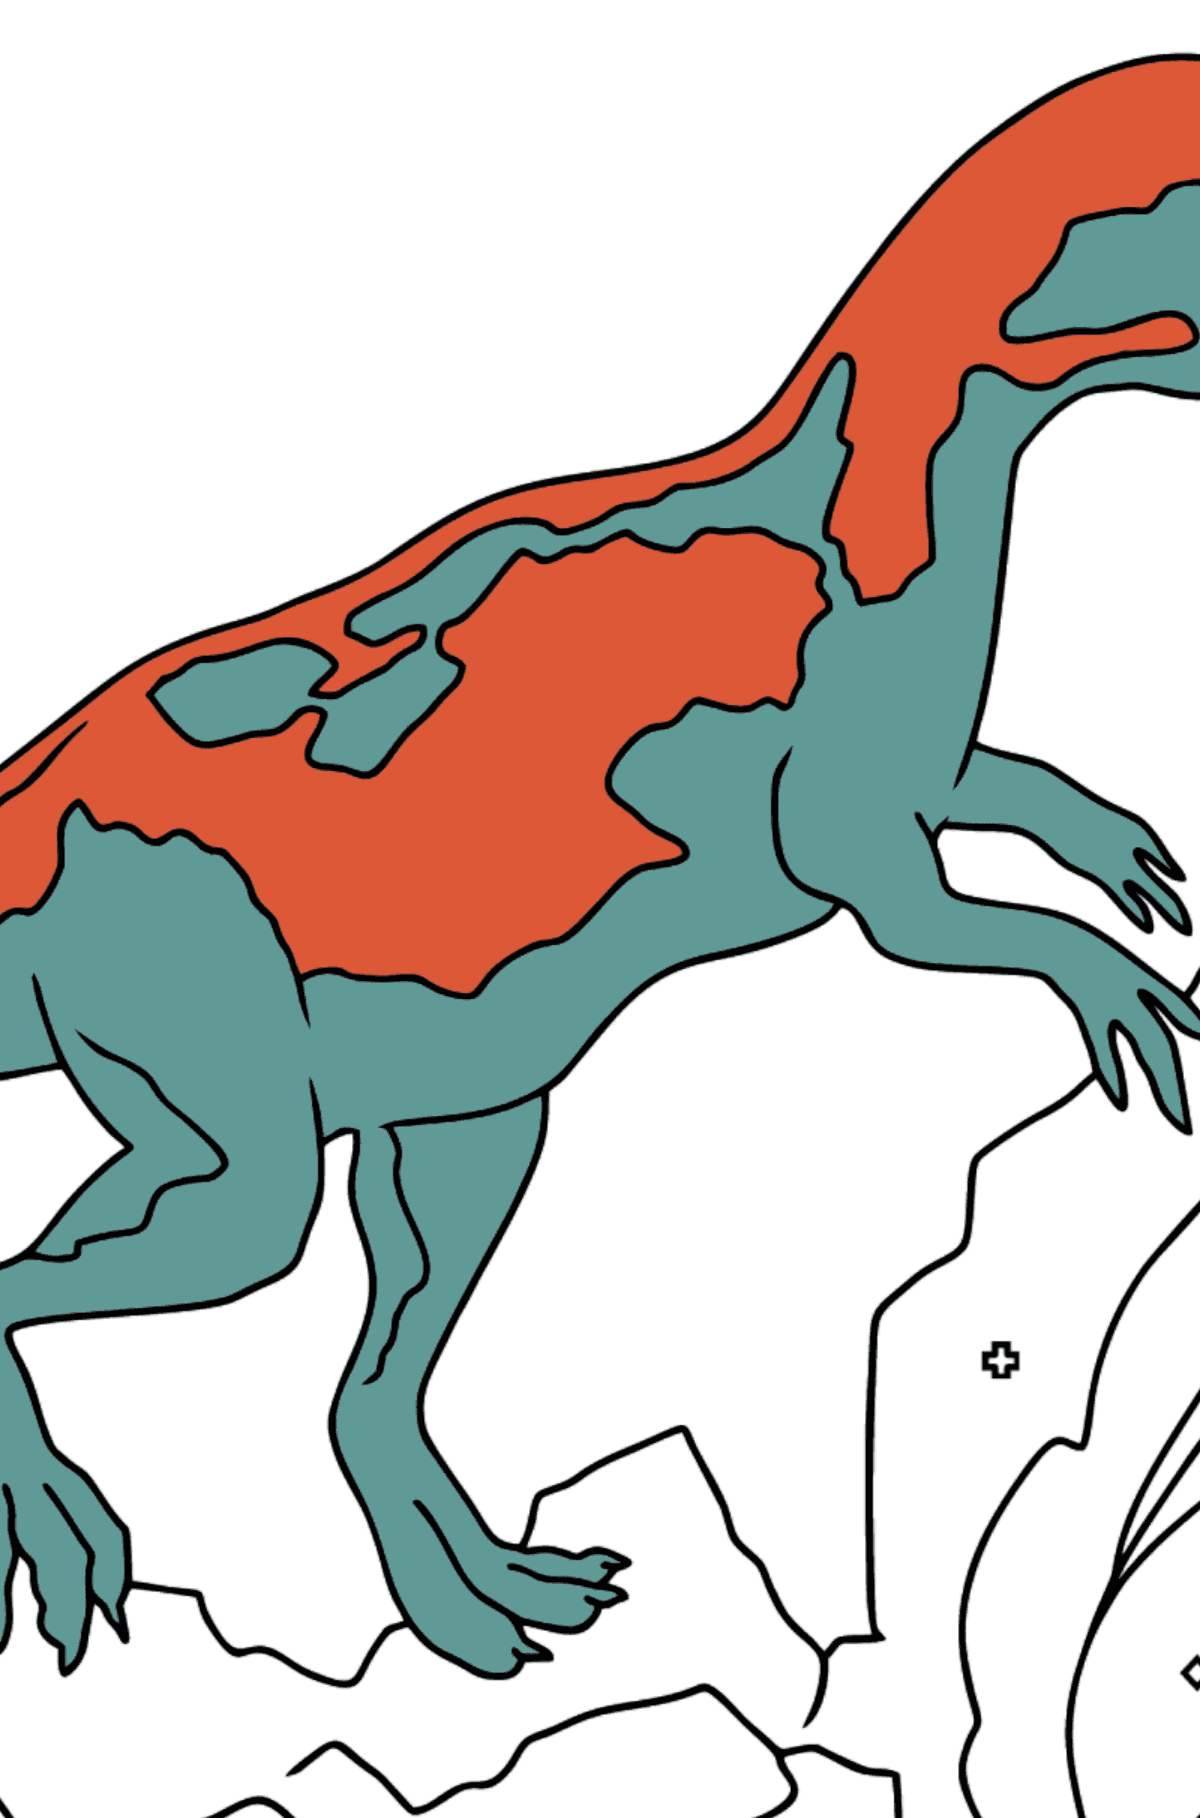 Jurassic Dinosaur Coloring Page (simple) - Coloring by Geometric Shapes for Kids